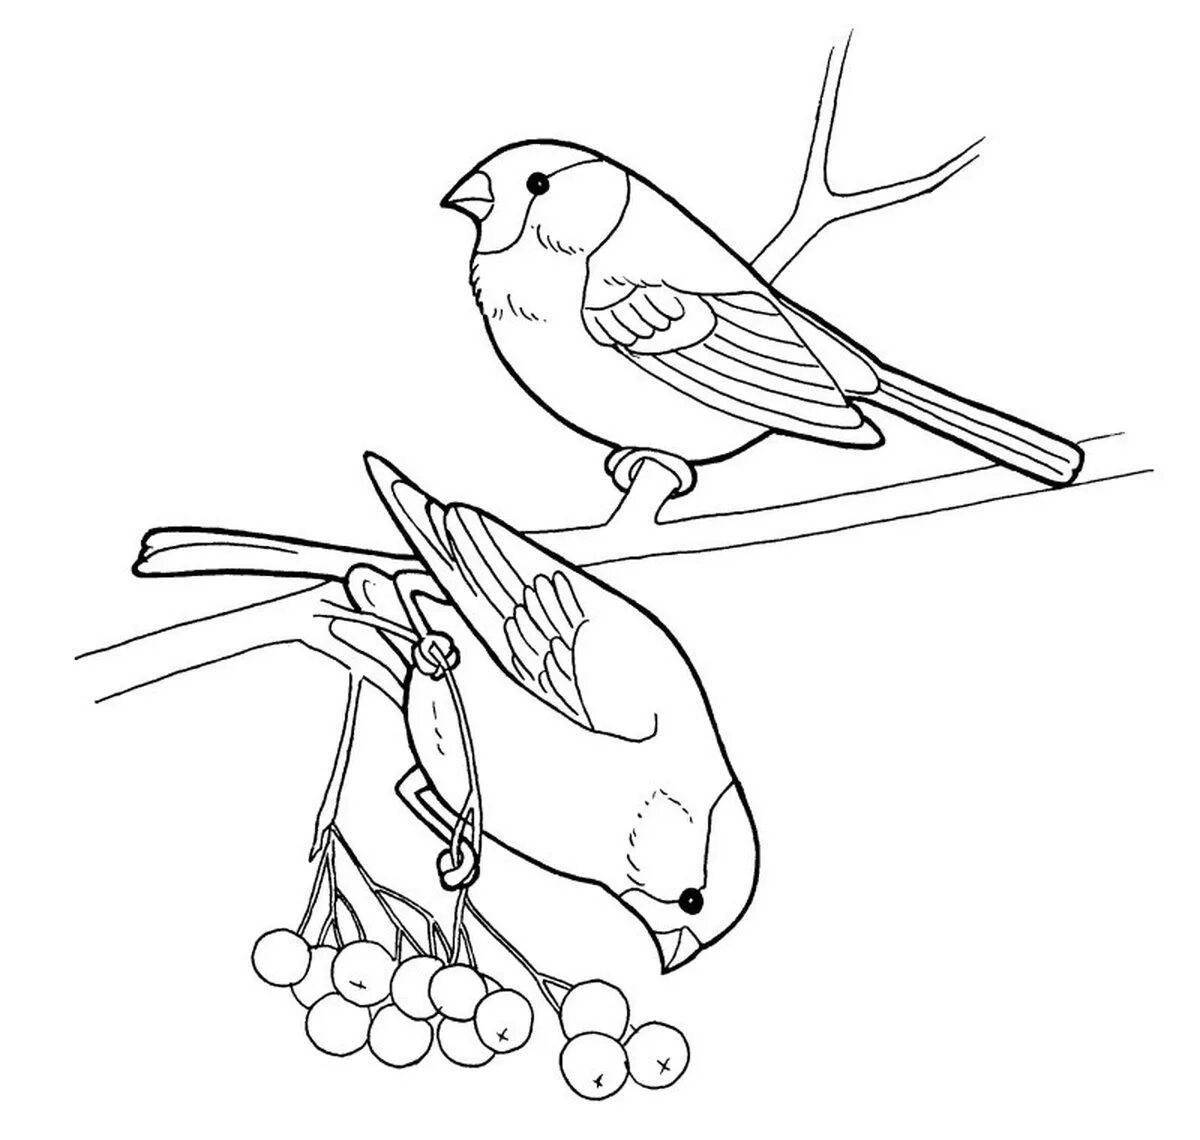 A fascinating drawing of a bullfinch on a branch